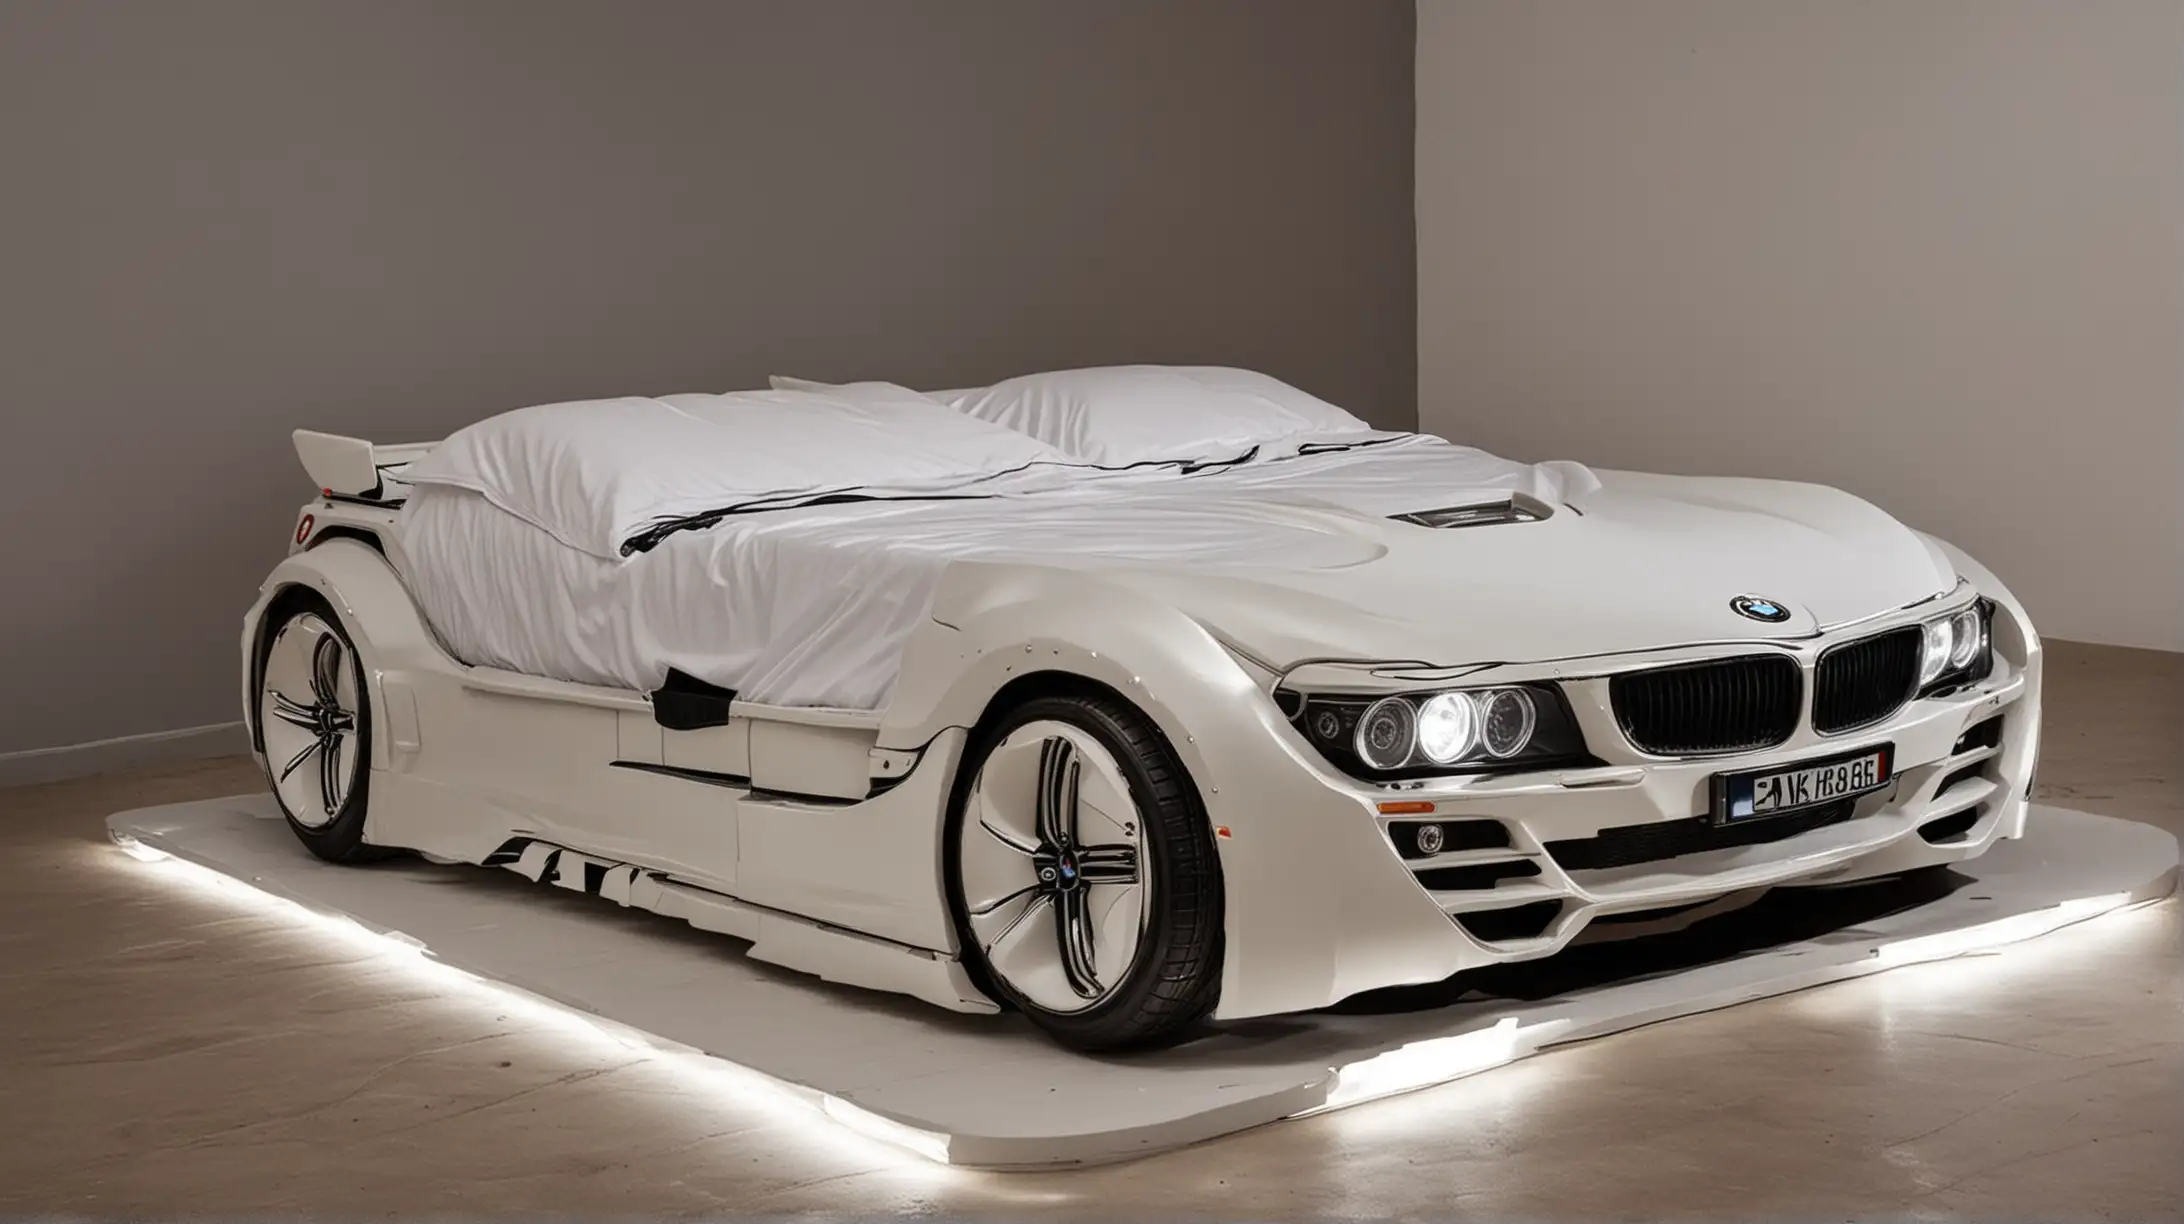 Luxury Double Bed Shaped like a BMW Car with Illuminated Headlights